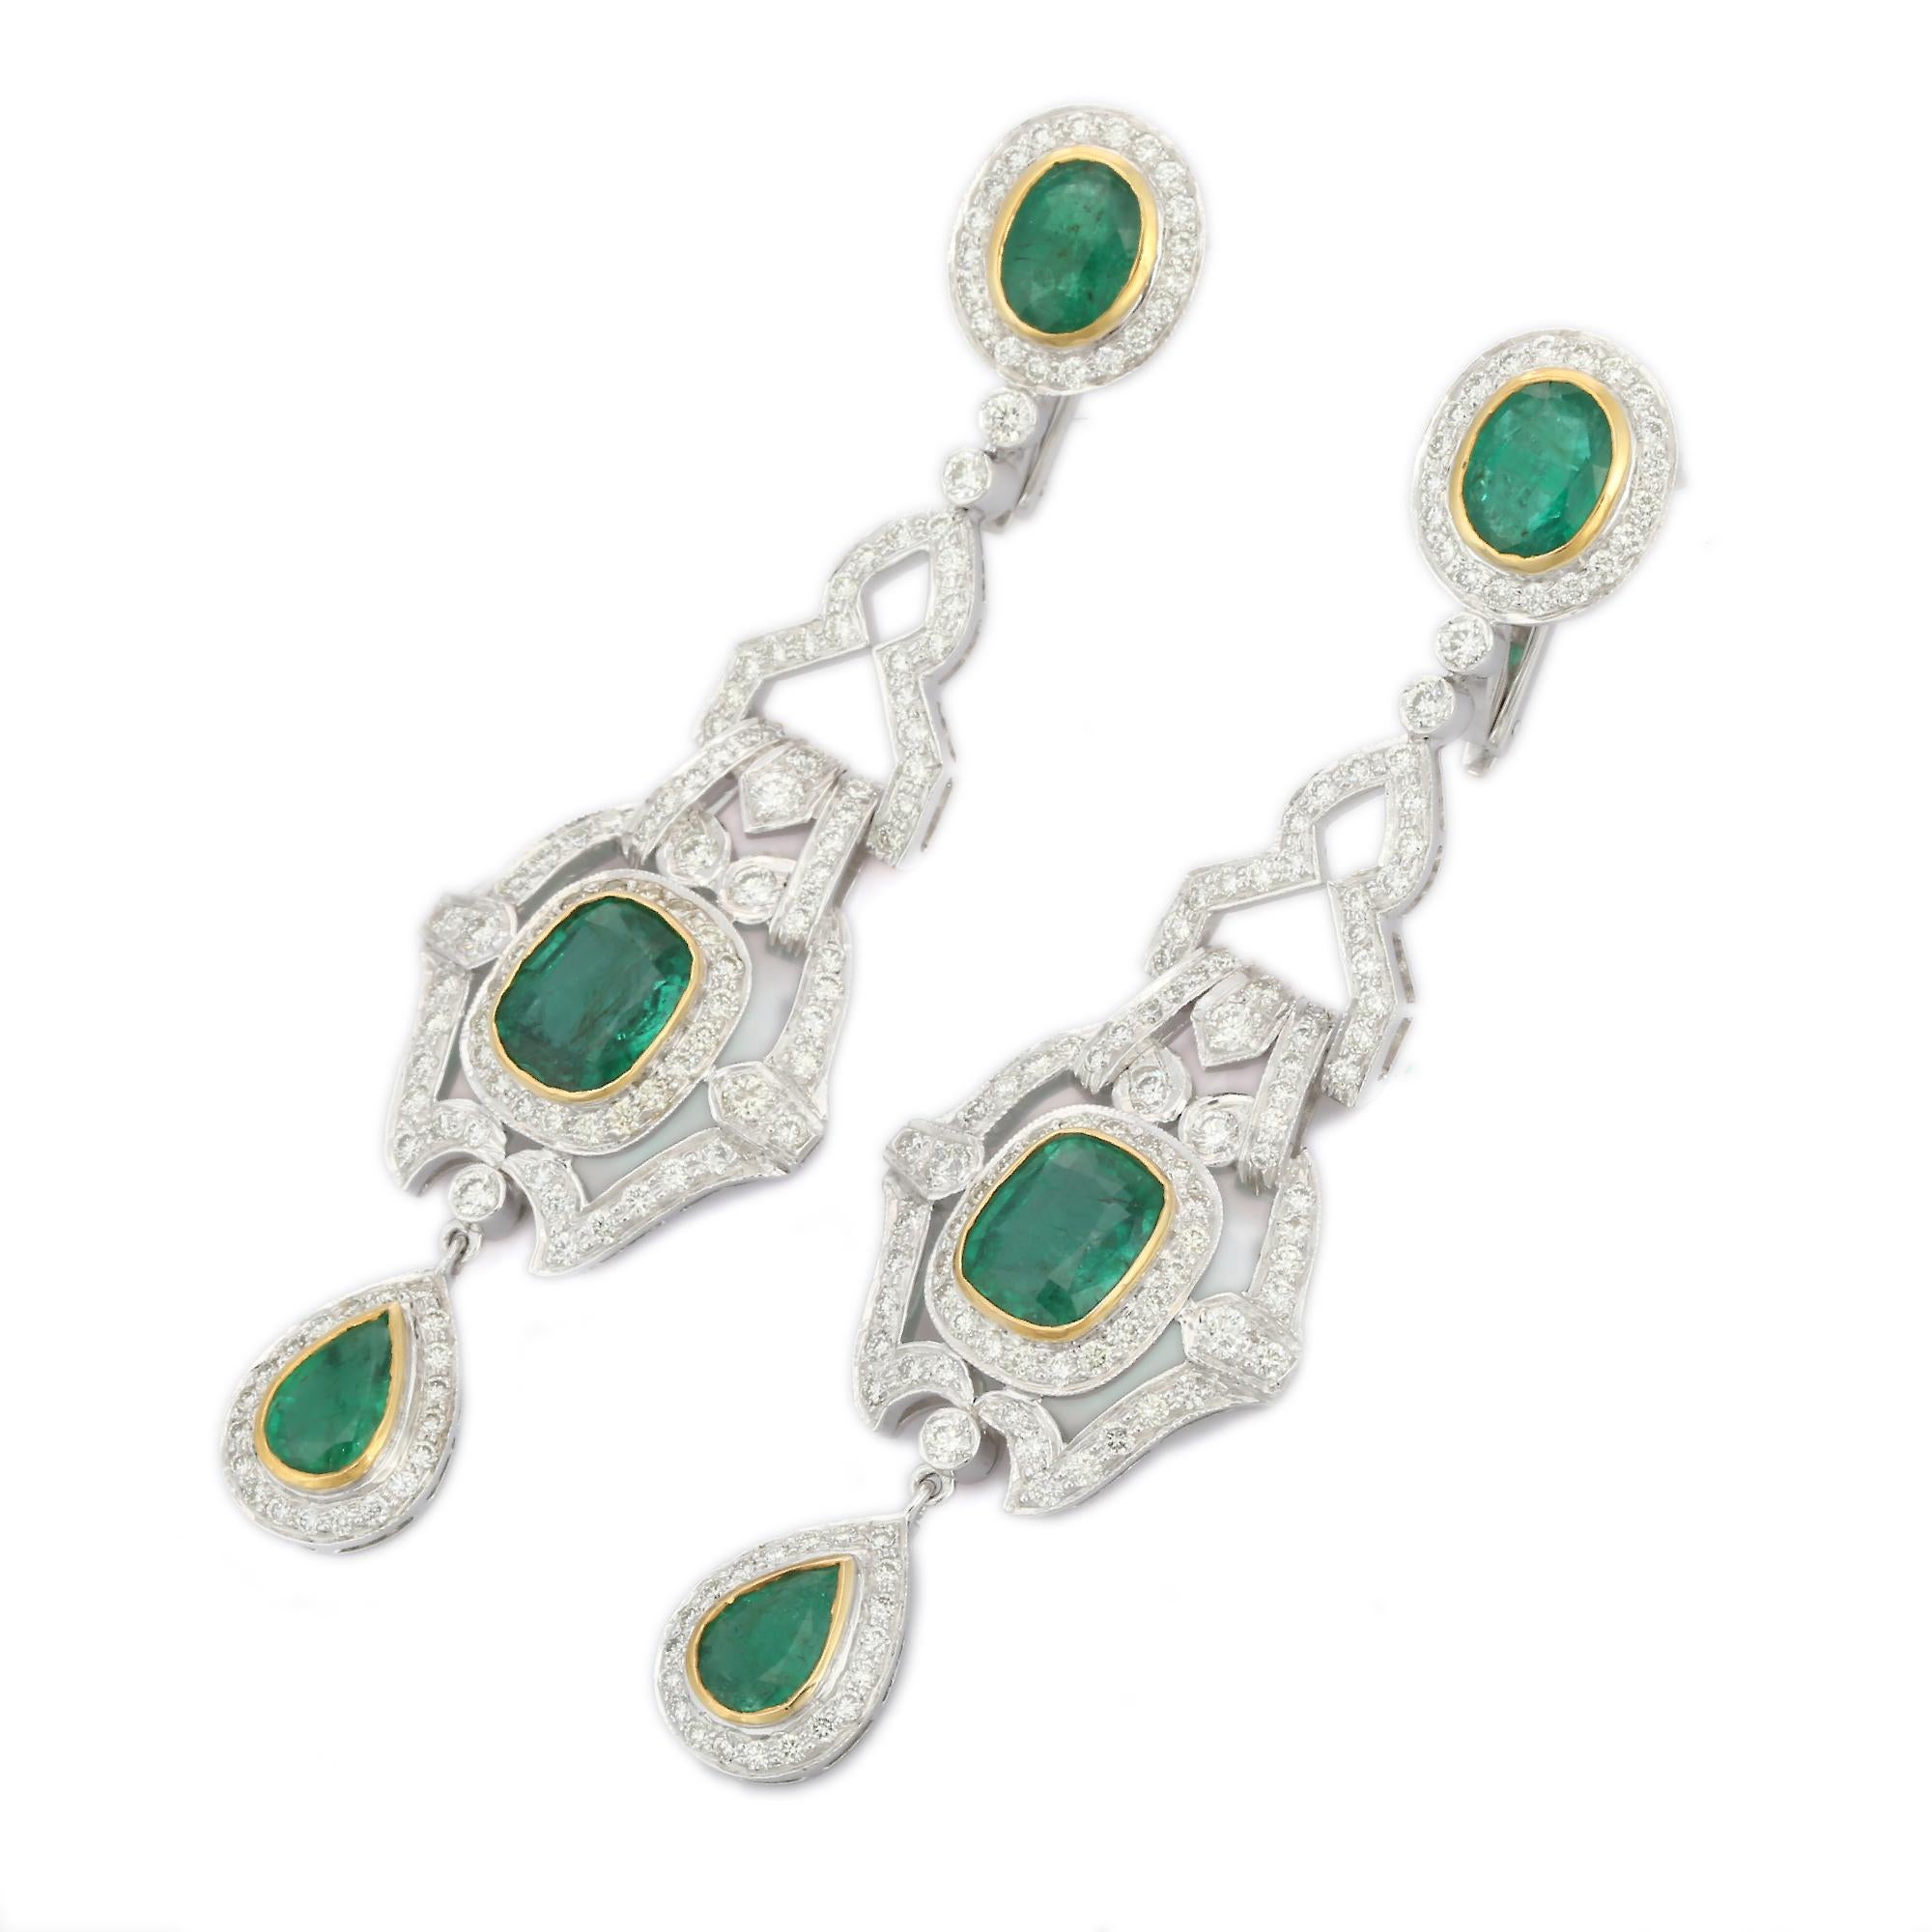 Art Deco Emerald Diamond Dangle Earrings in 18K Gold to make a statement with your look. You shall need statement dangle earrings to make a statement with your look. These earrings create a sparkling, luxurious look featuring oval cut